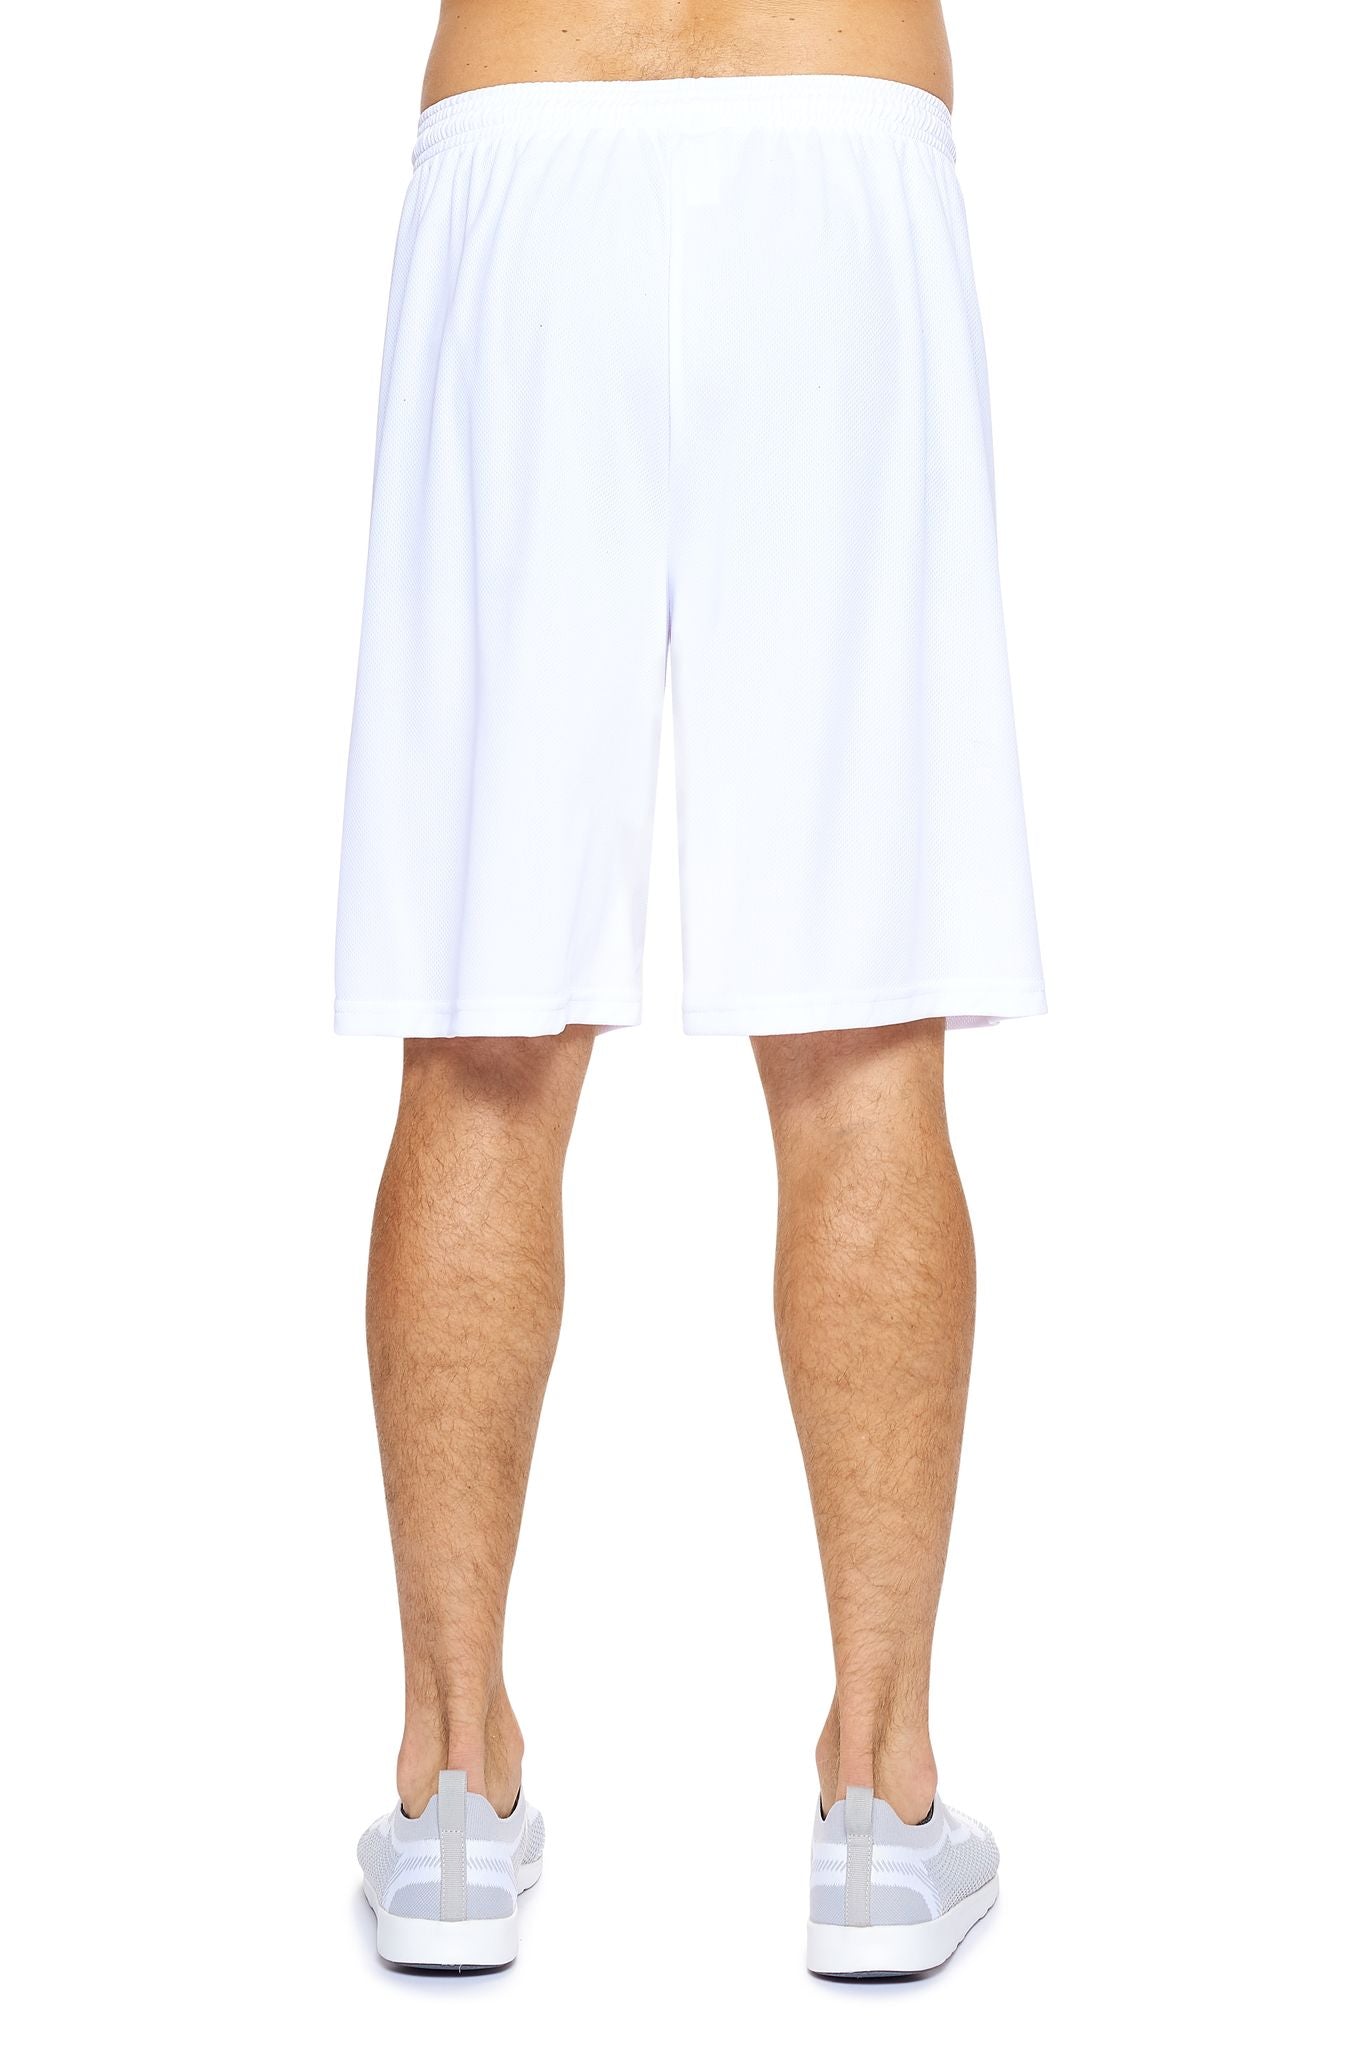 Oxymesh™ Training Shorts 🇺🇸 - Expert Brand Apparel#color_white